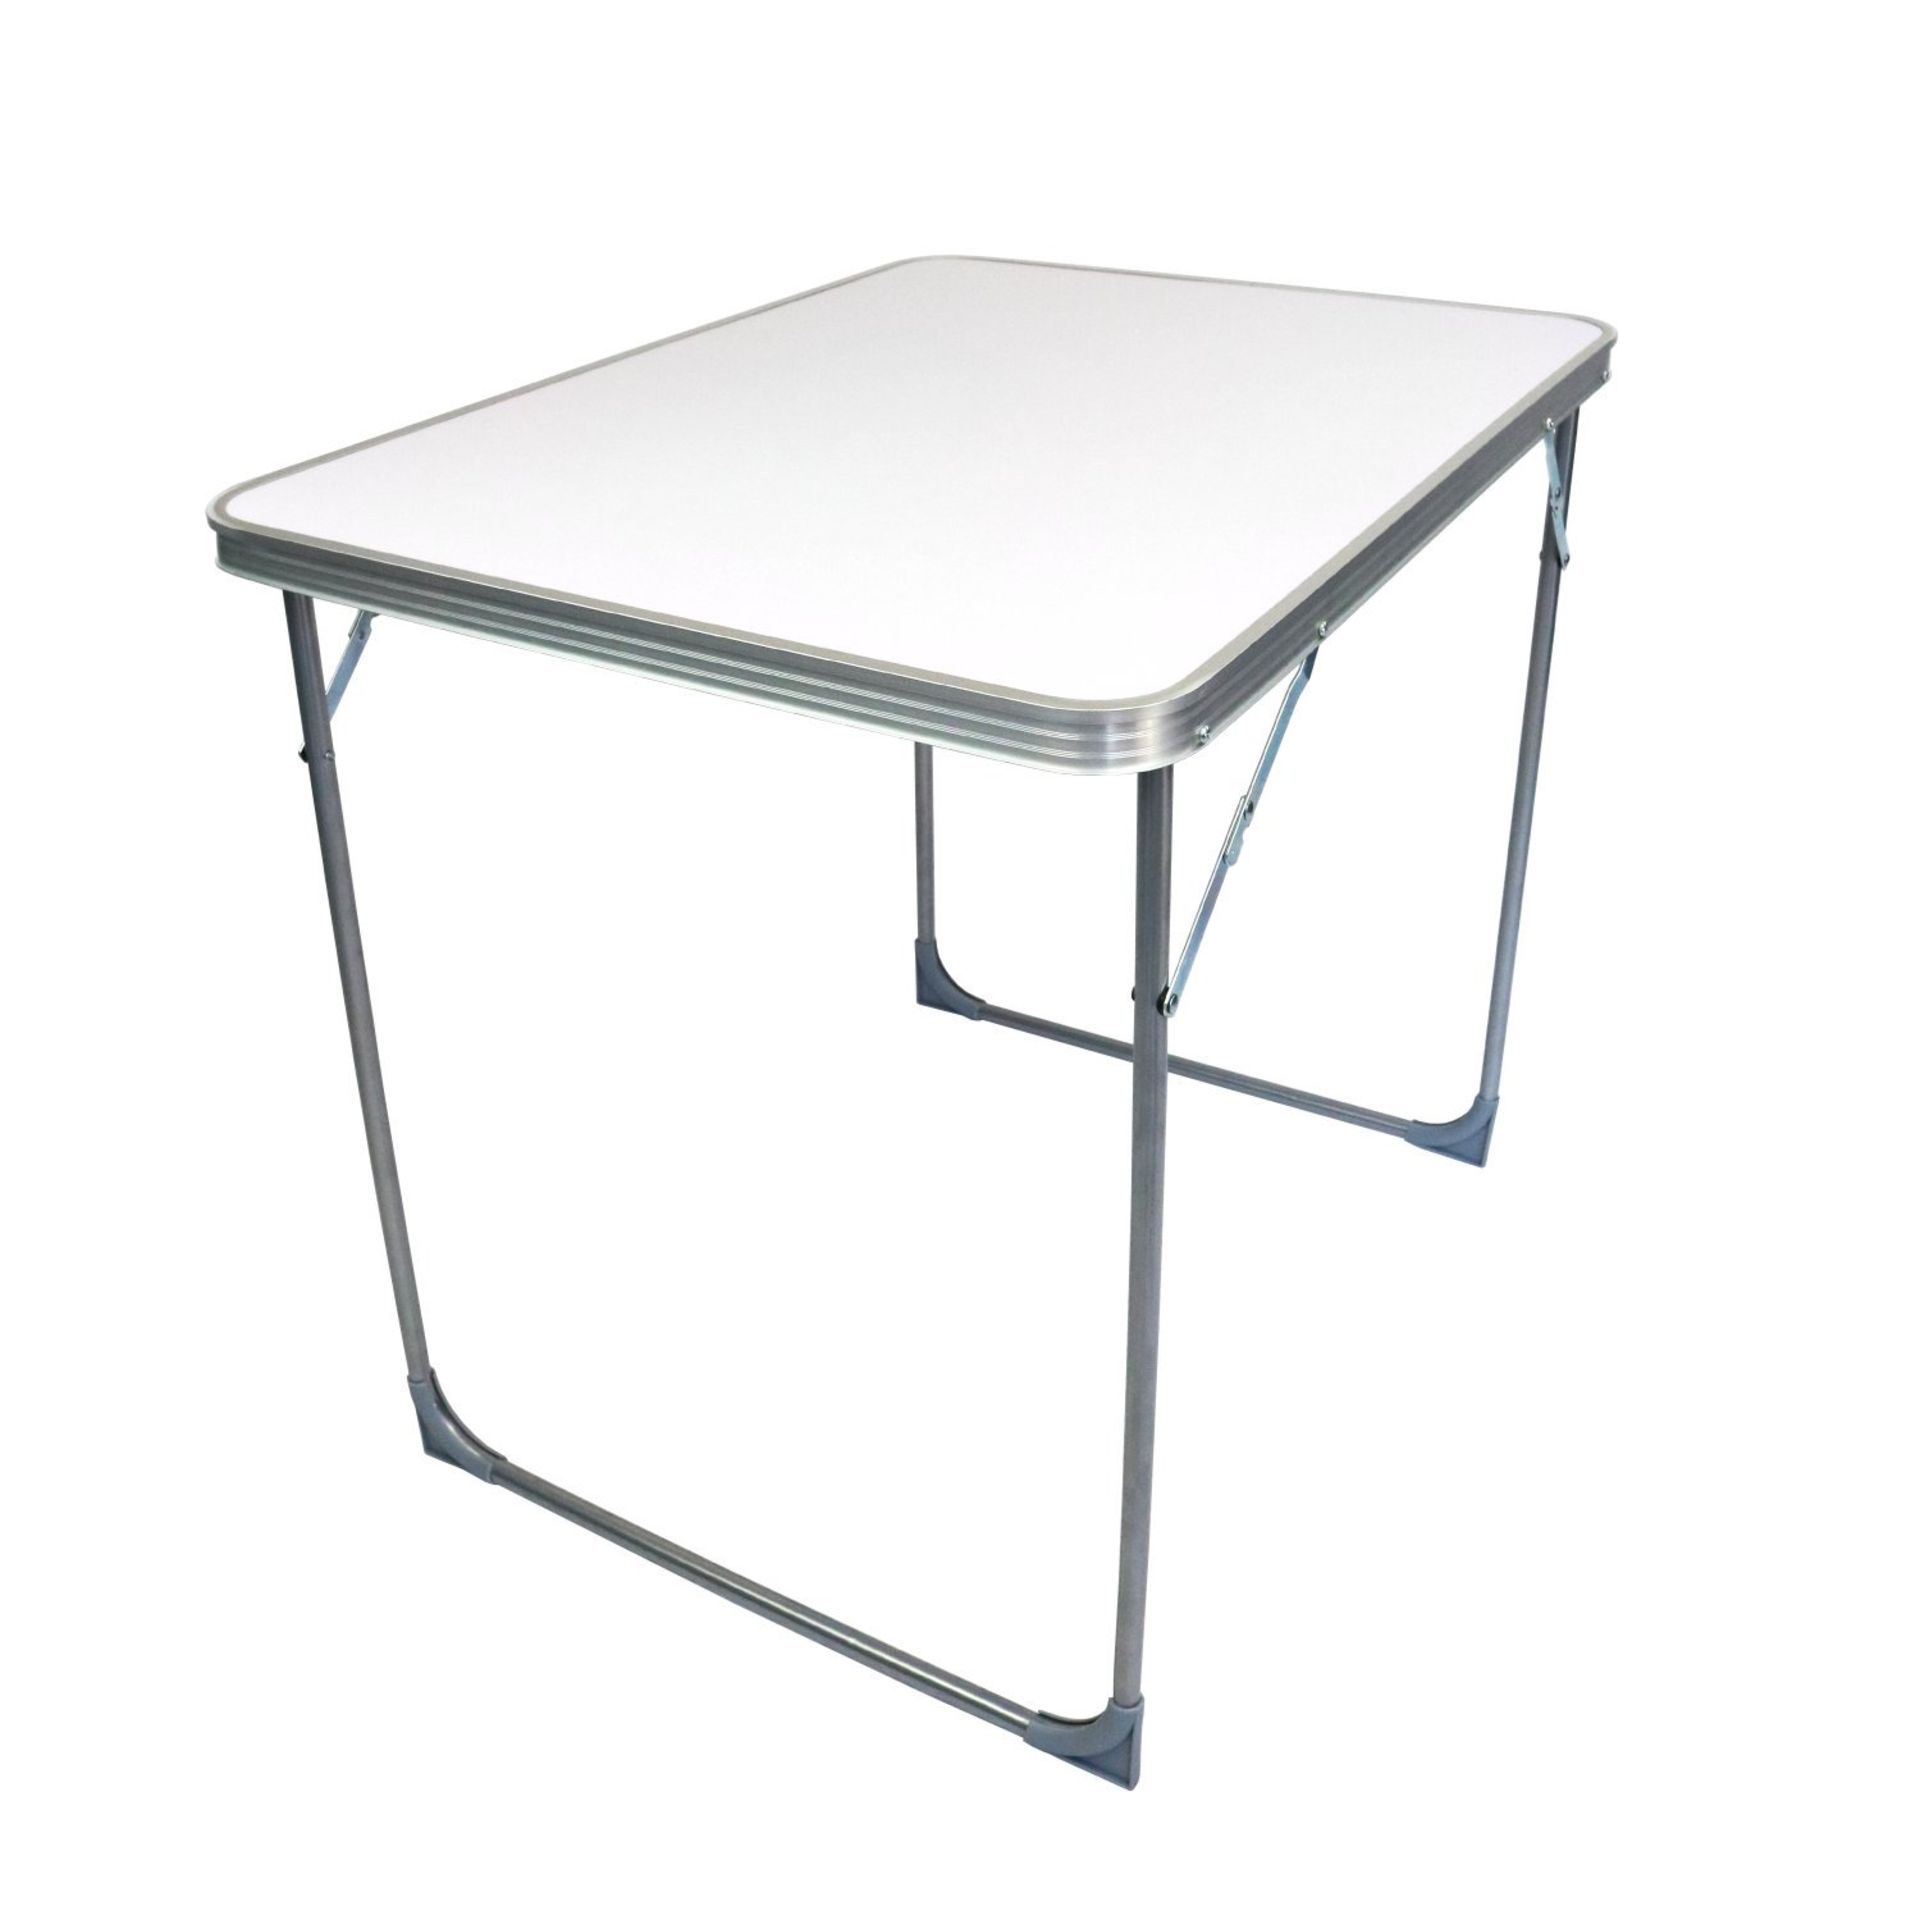 (RL18) Portable Folding Outdoor Camping Kitchen Work Top Table The aluminium folding picnic ... - Image 2 of 2